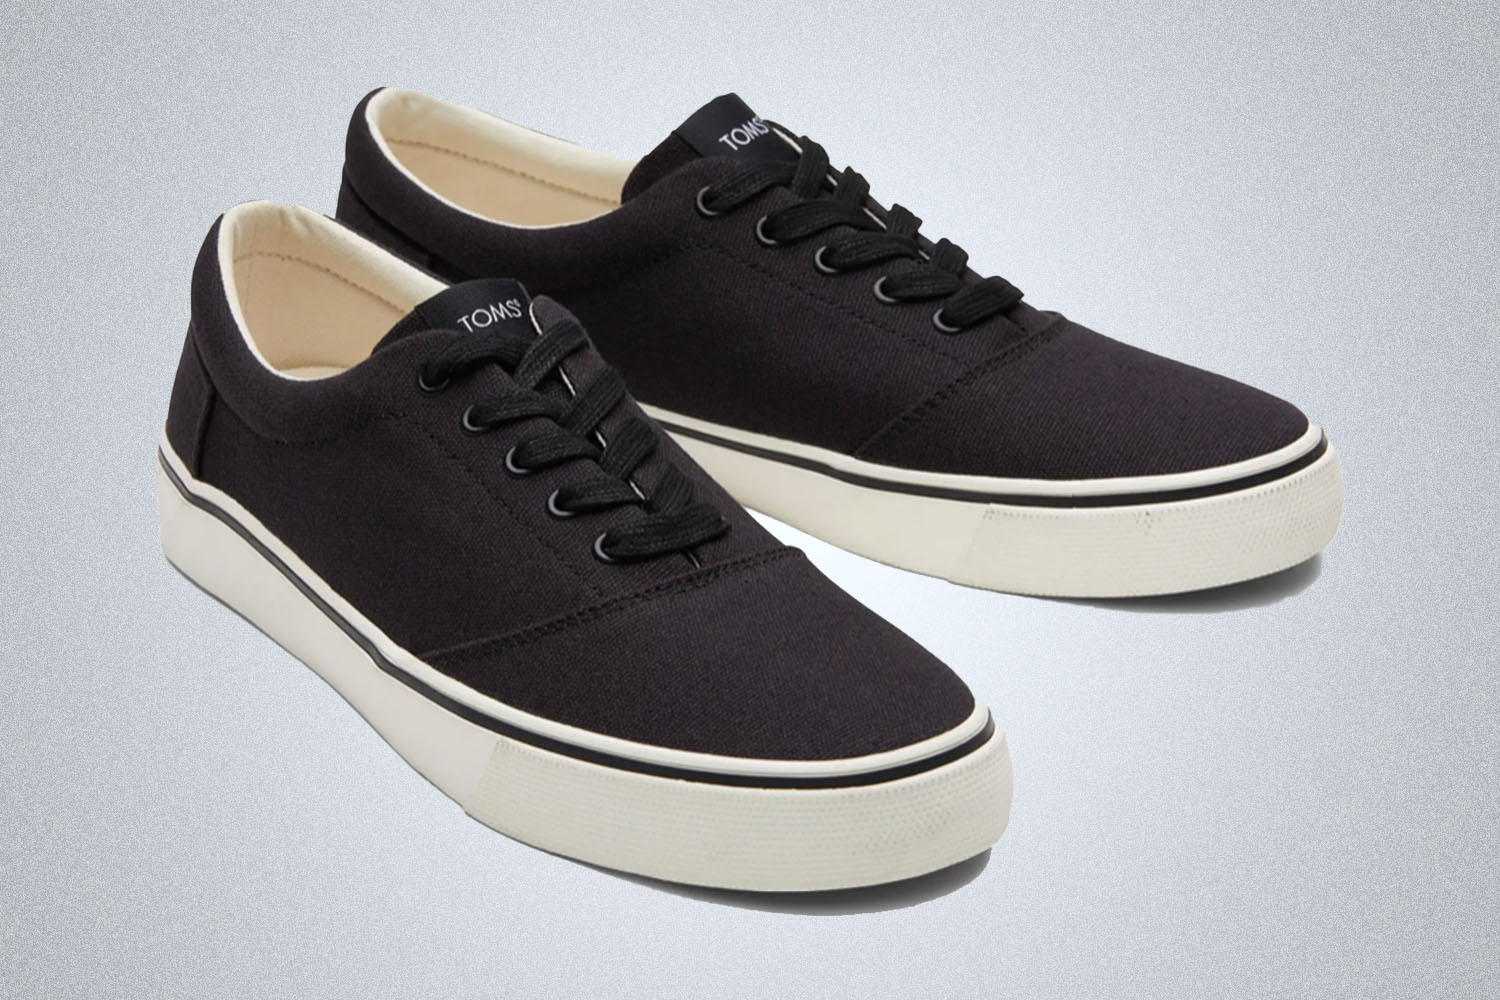 a pair of lightweight black sneakers from Toms on a grey background